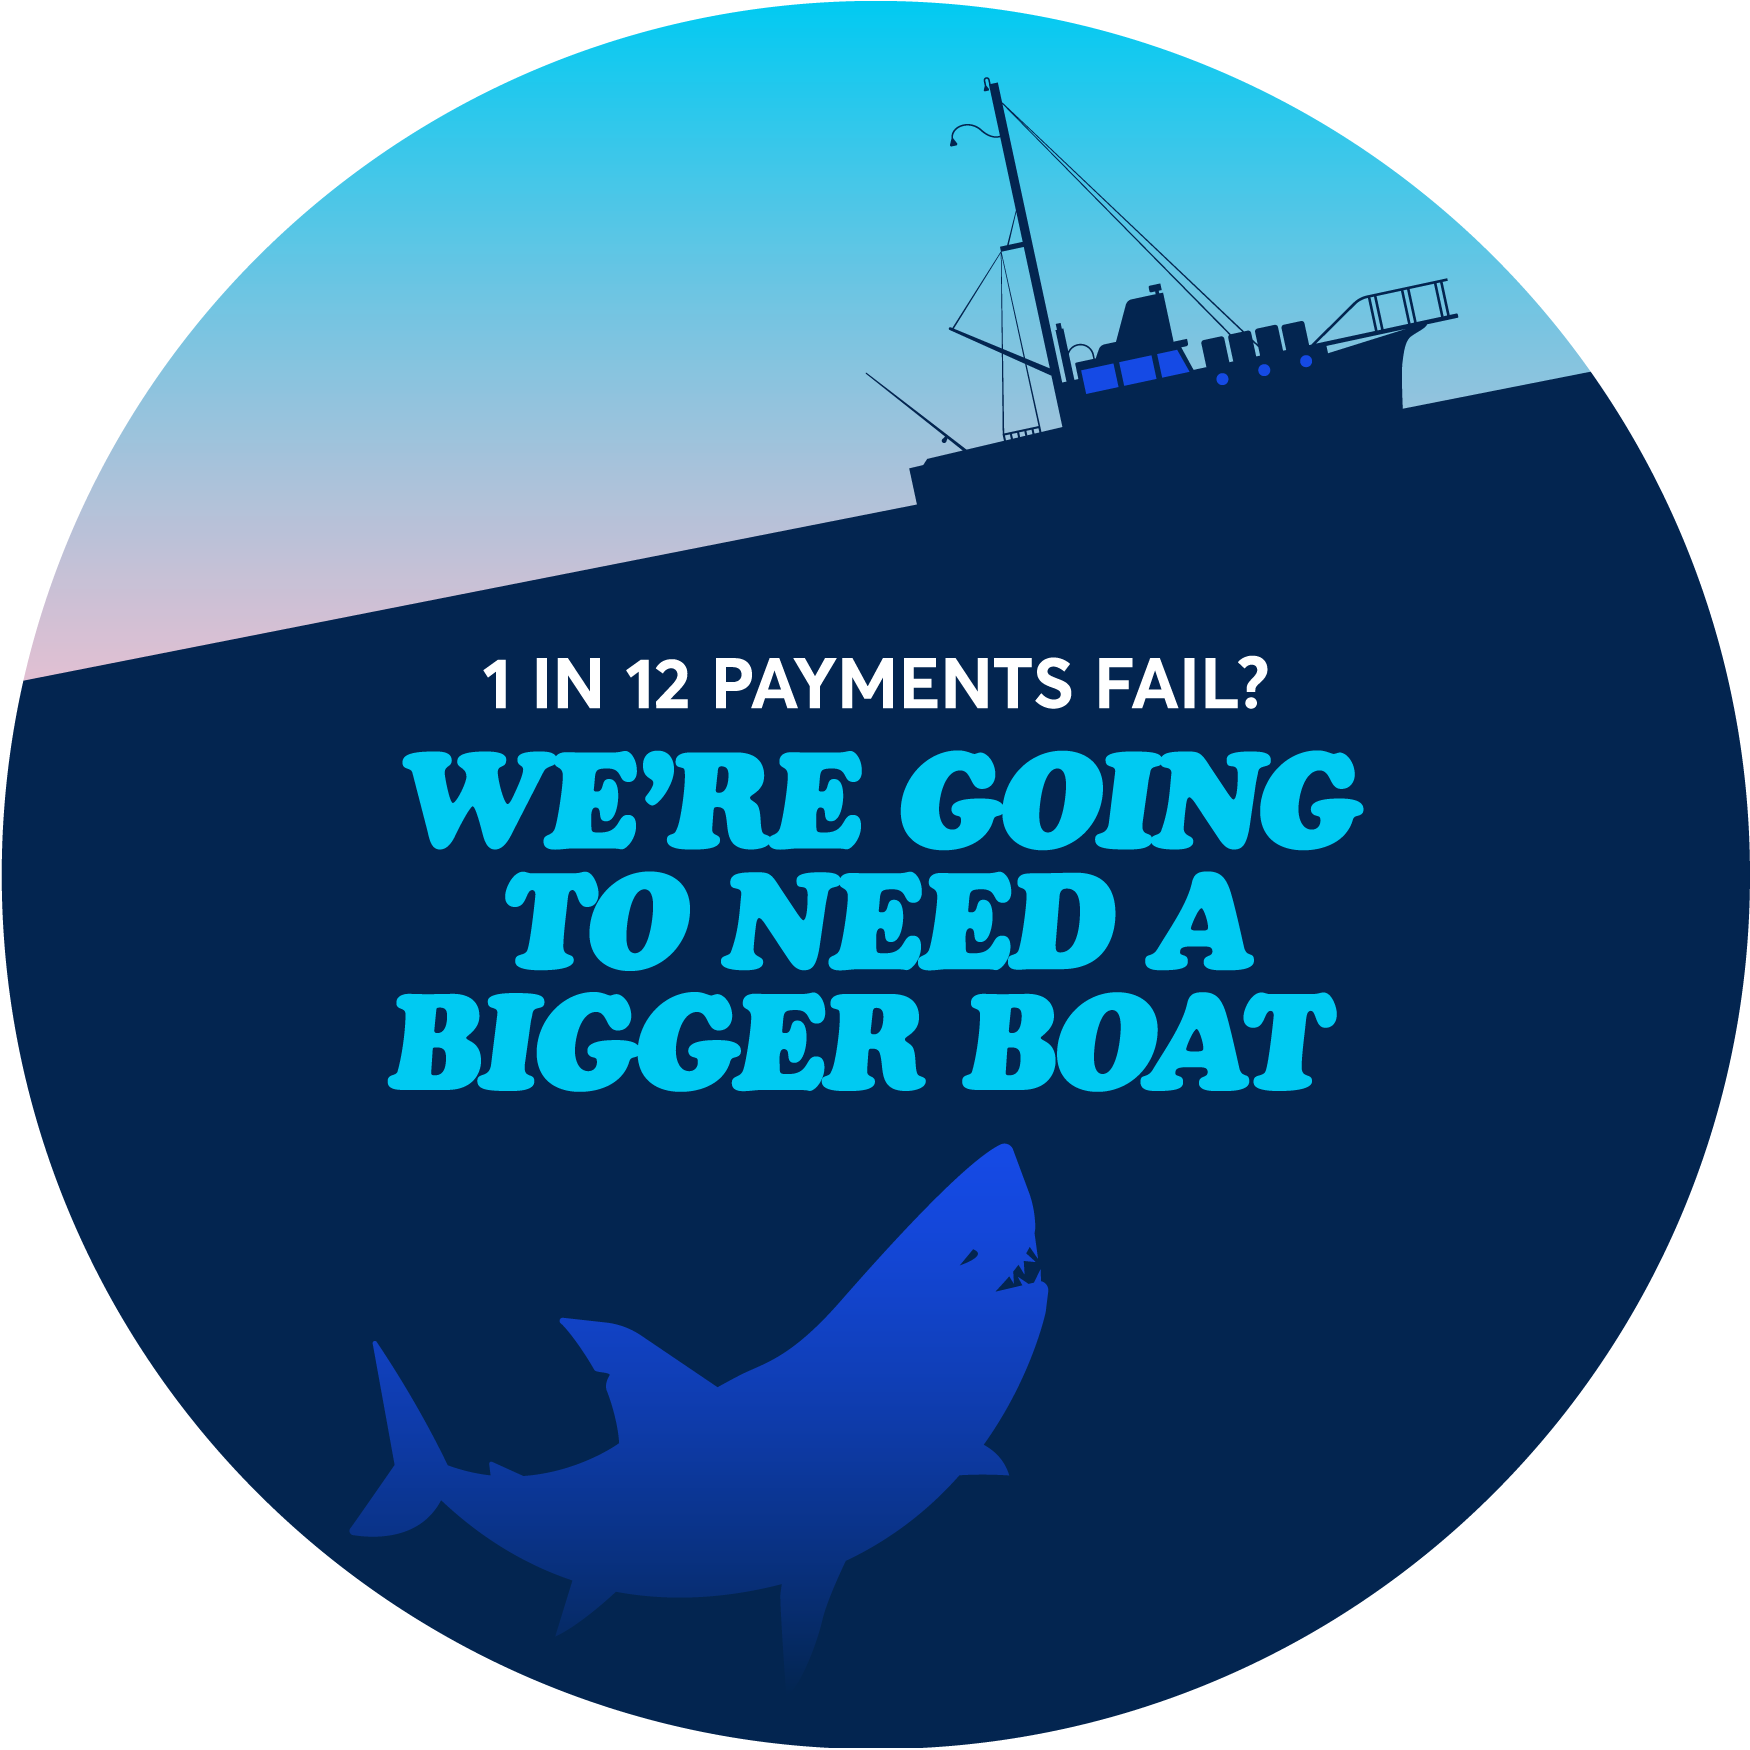 Save yourself from the jaws of failed payments 